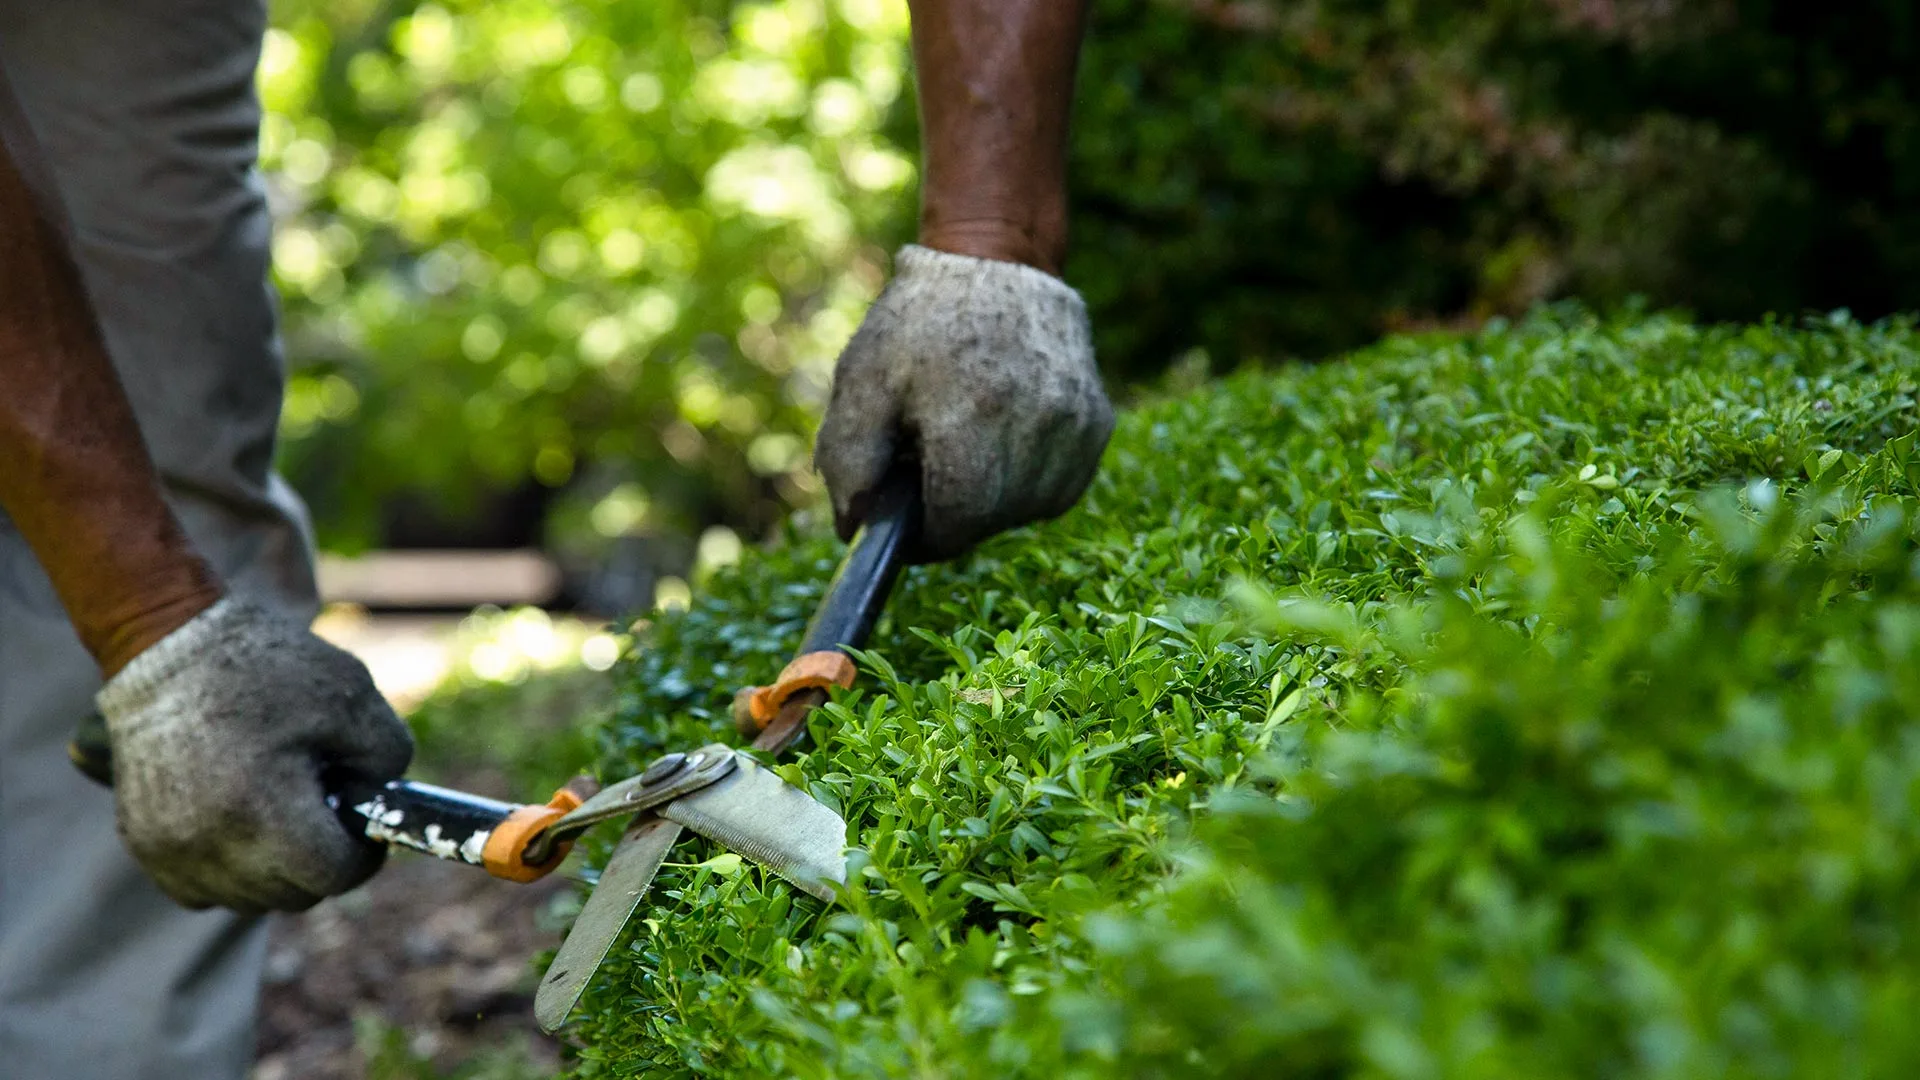 A close up shot of an expert trimming a shrub and hedge with clippers near Arlington, VA.